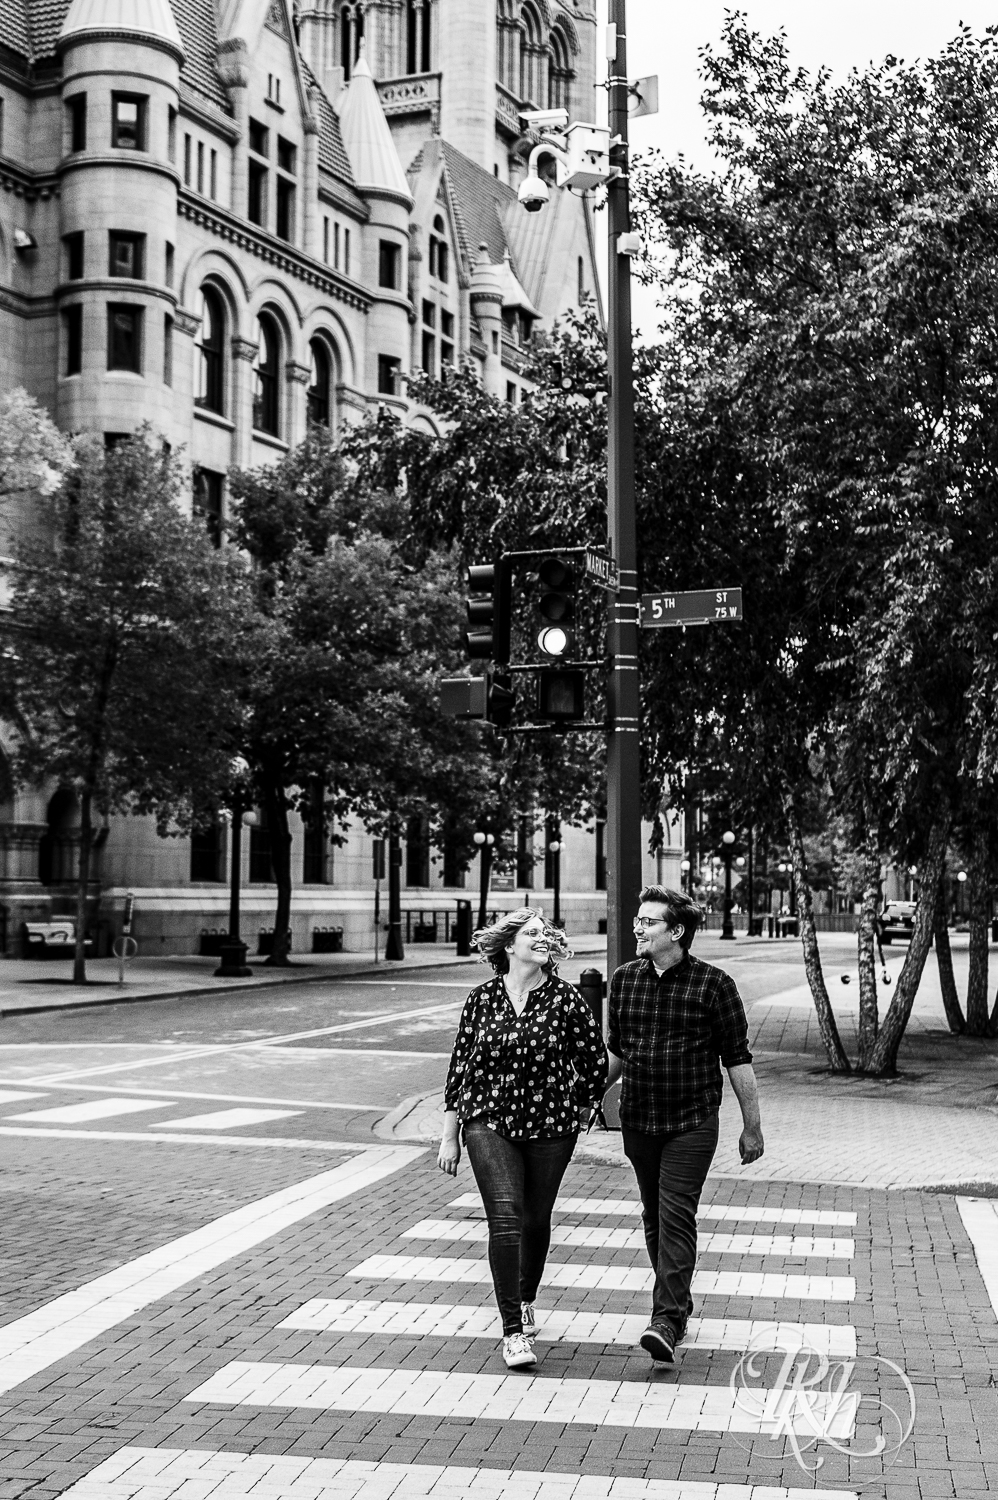 Blond woman with glasses and man with glasses walk across the street in Saint Paul, Minnesota.